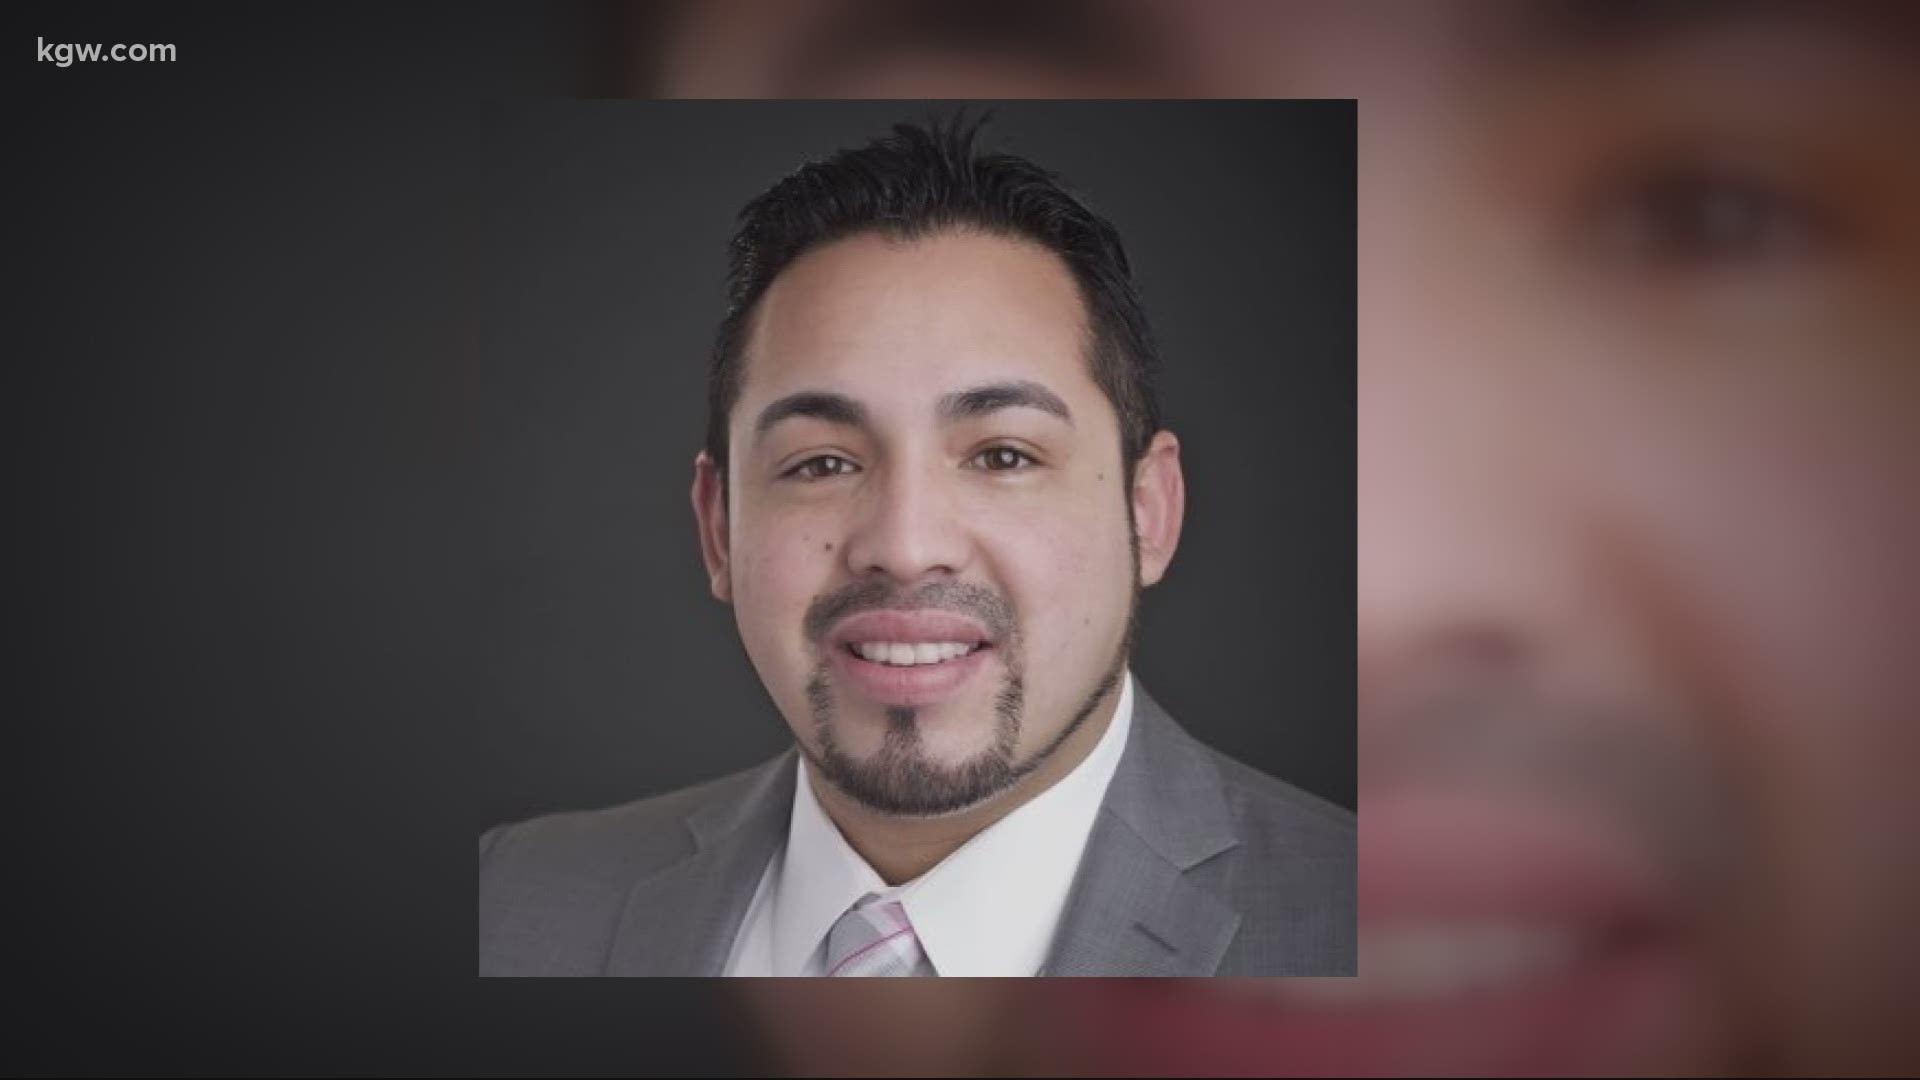 Rep. Diego Hernandez called it quits before the legislature could vote to have him removed.